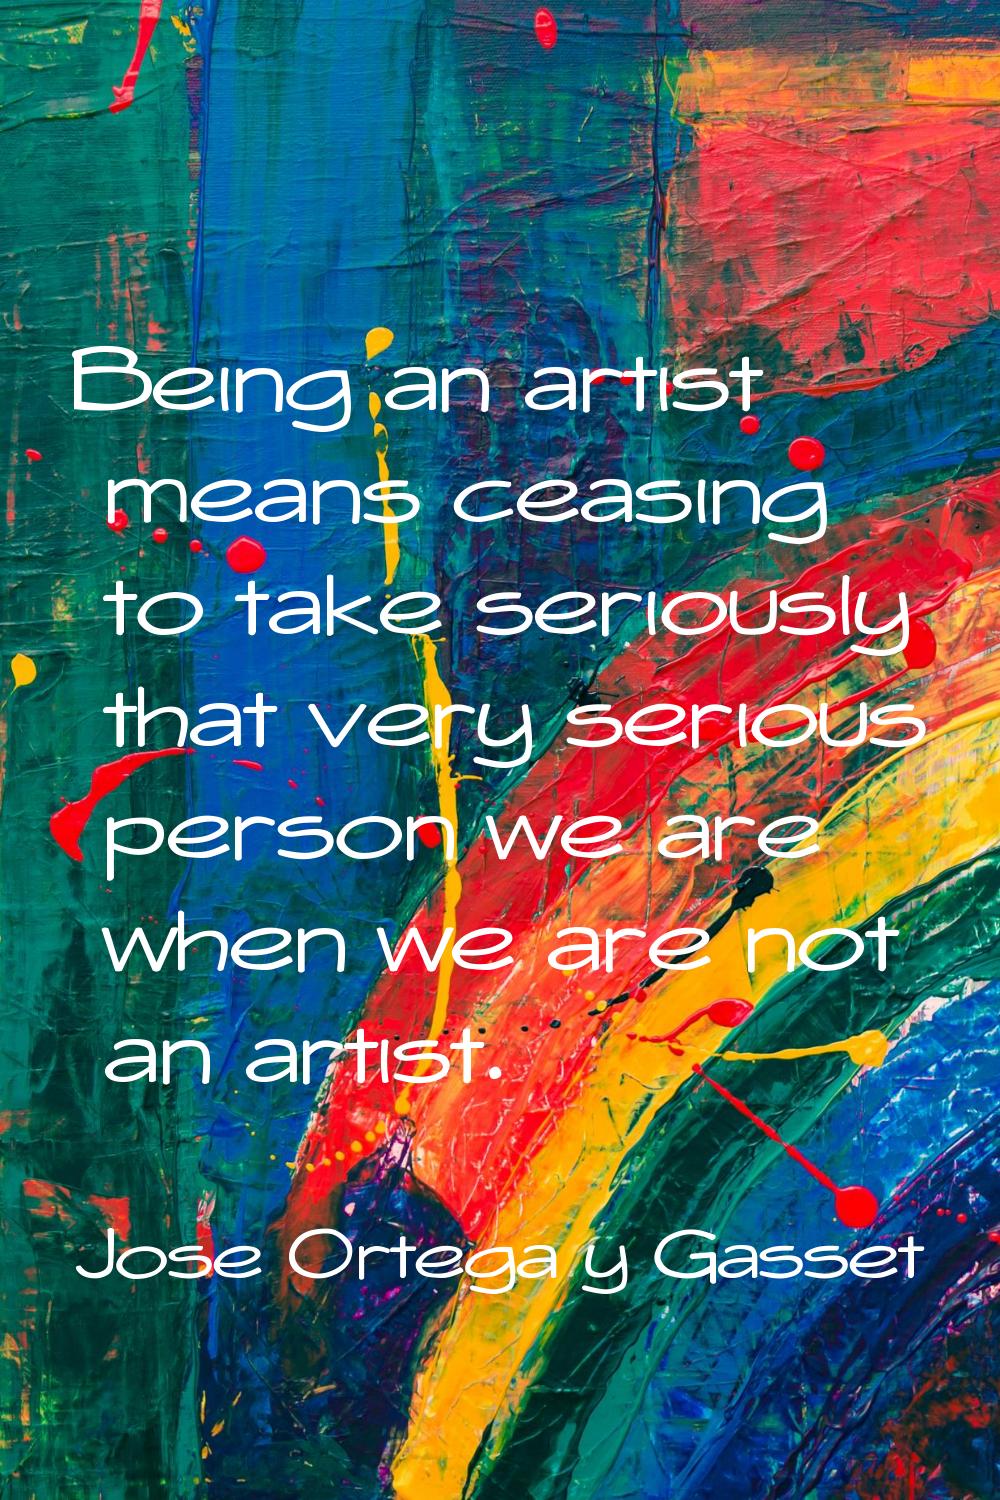 Being an artist means ceasing to take seriously that very serious person we are when we are not an 